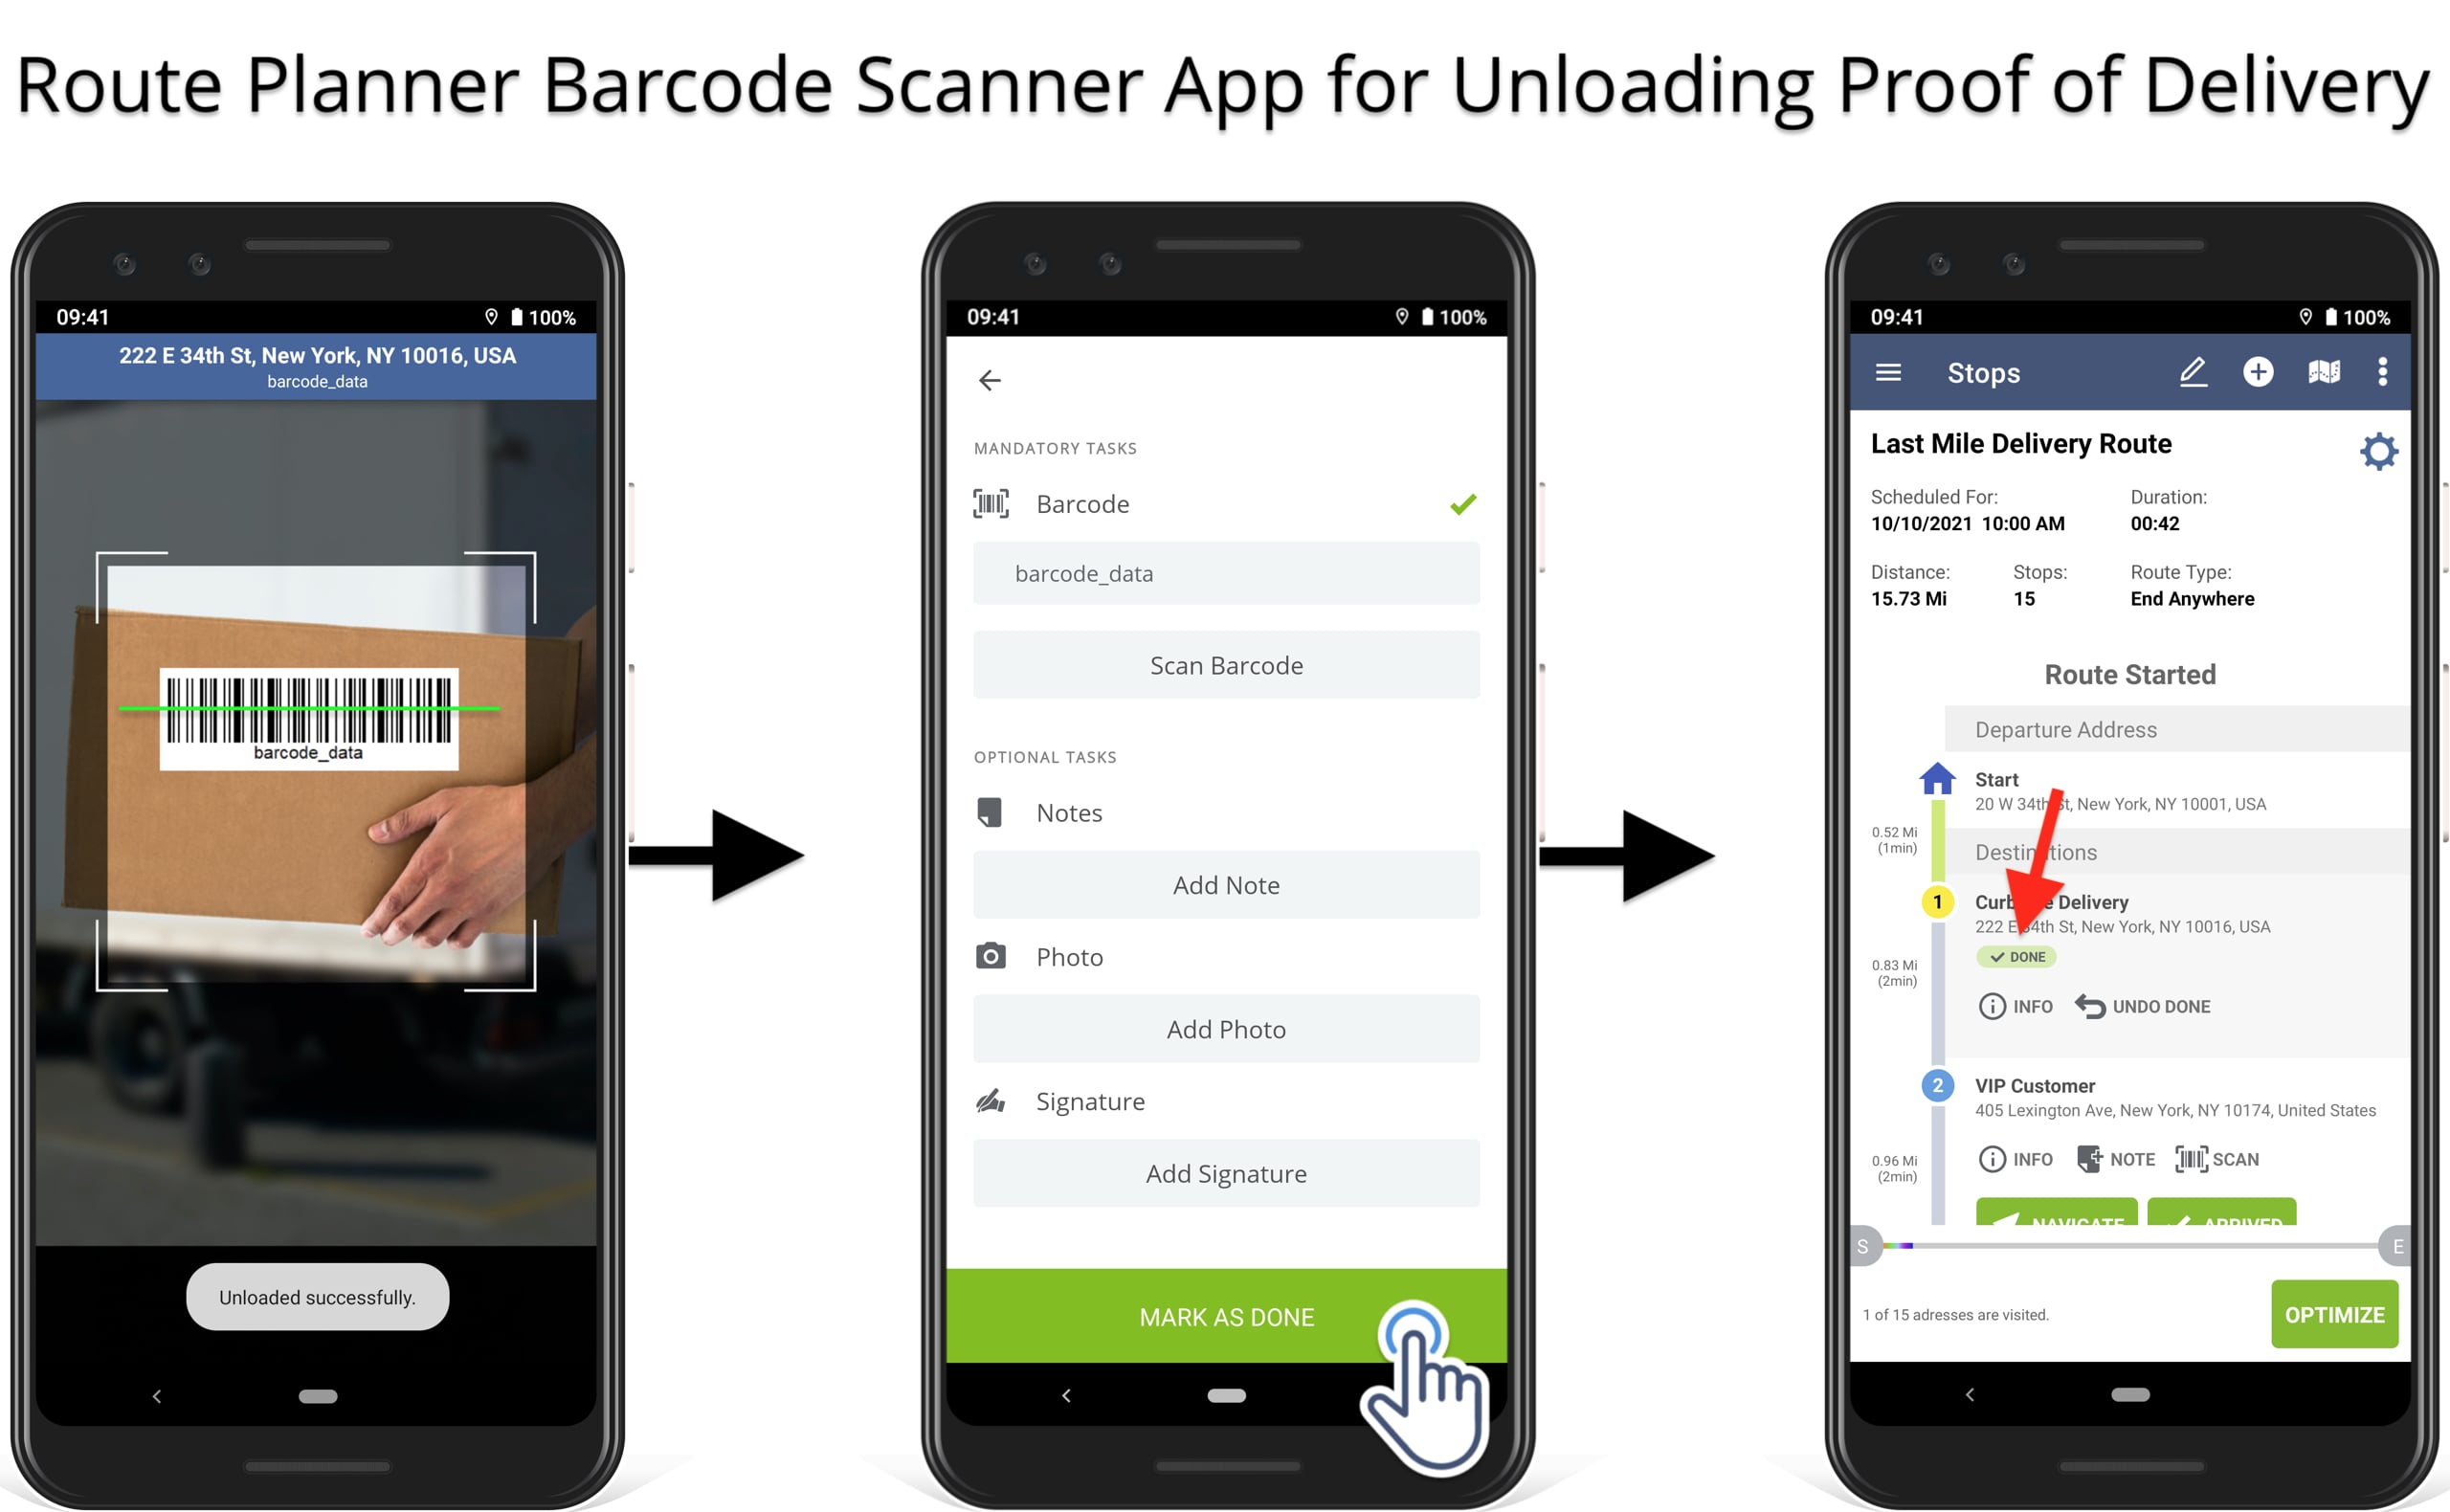 Barcode scanner app with mandatory QR code reconciliation for delivery unloading confirmation.